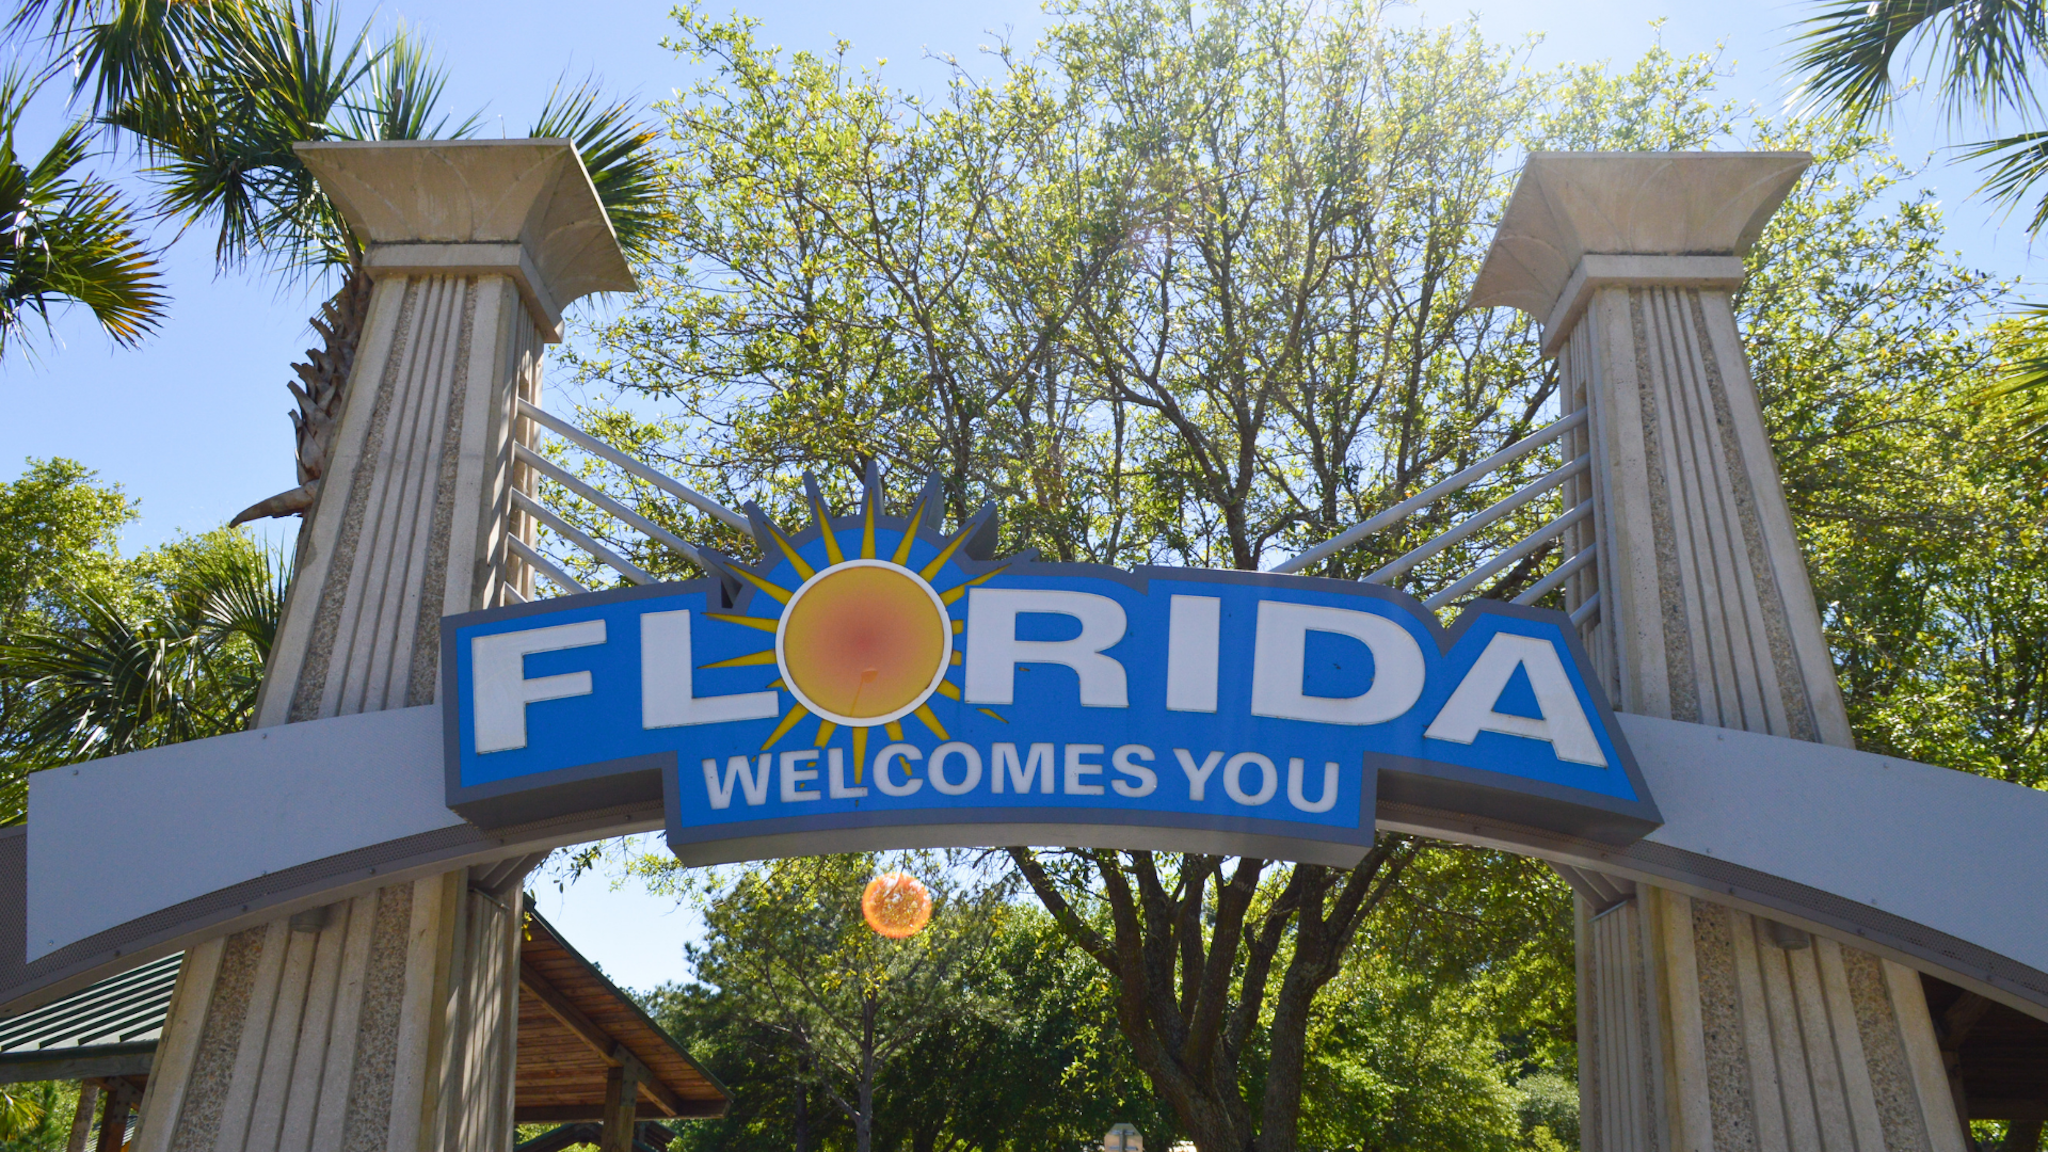 Florida Welcome sign, stock photo.